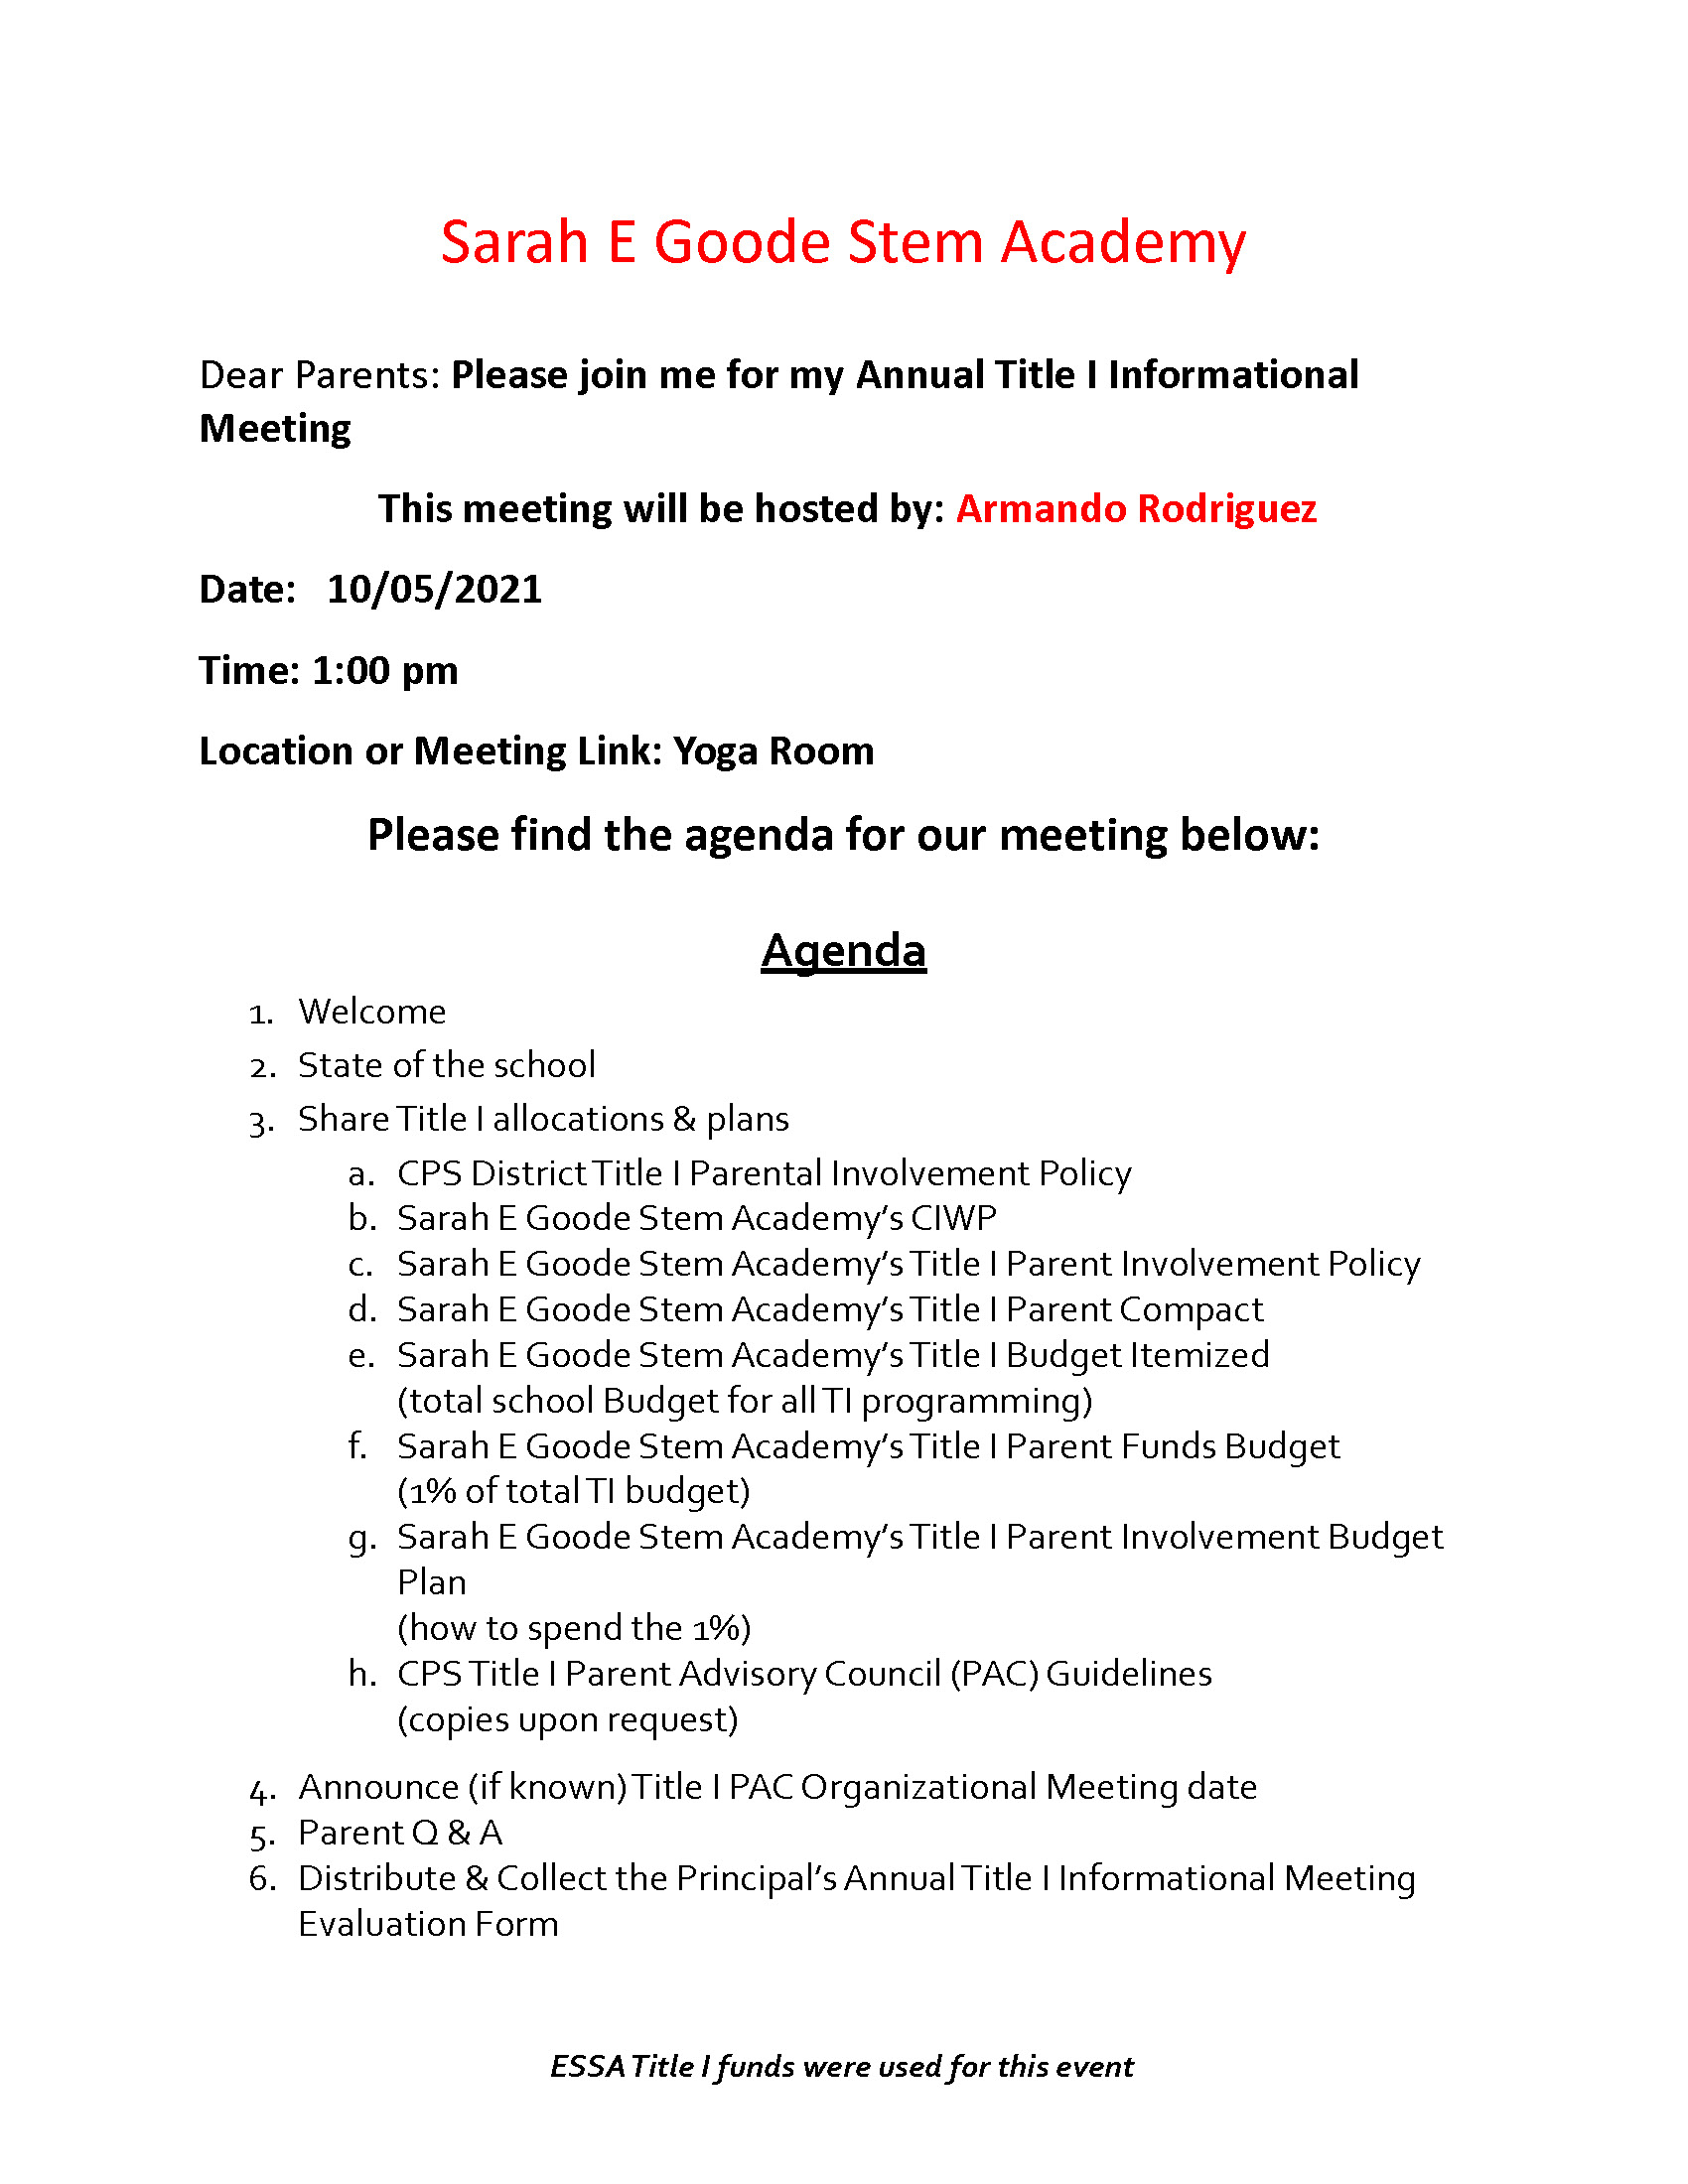 Annual Title I Informational Meeting